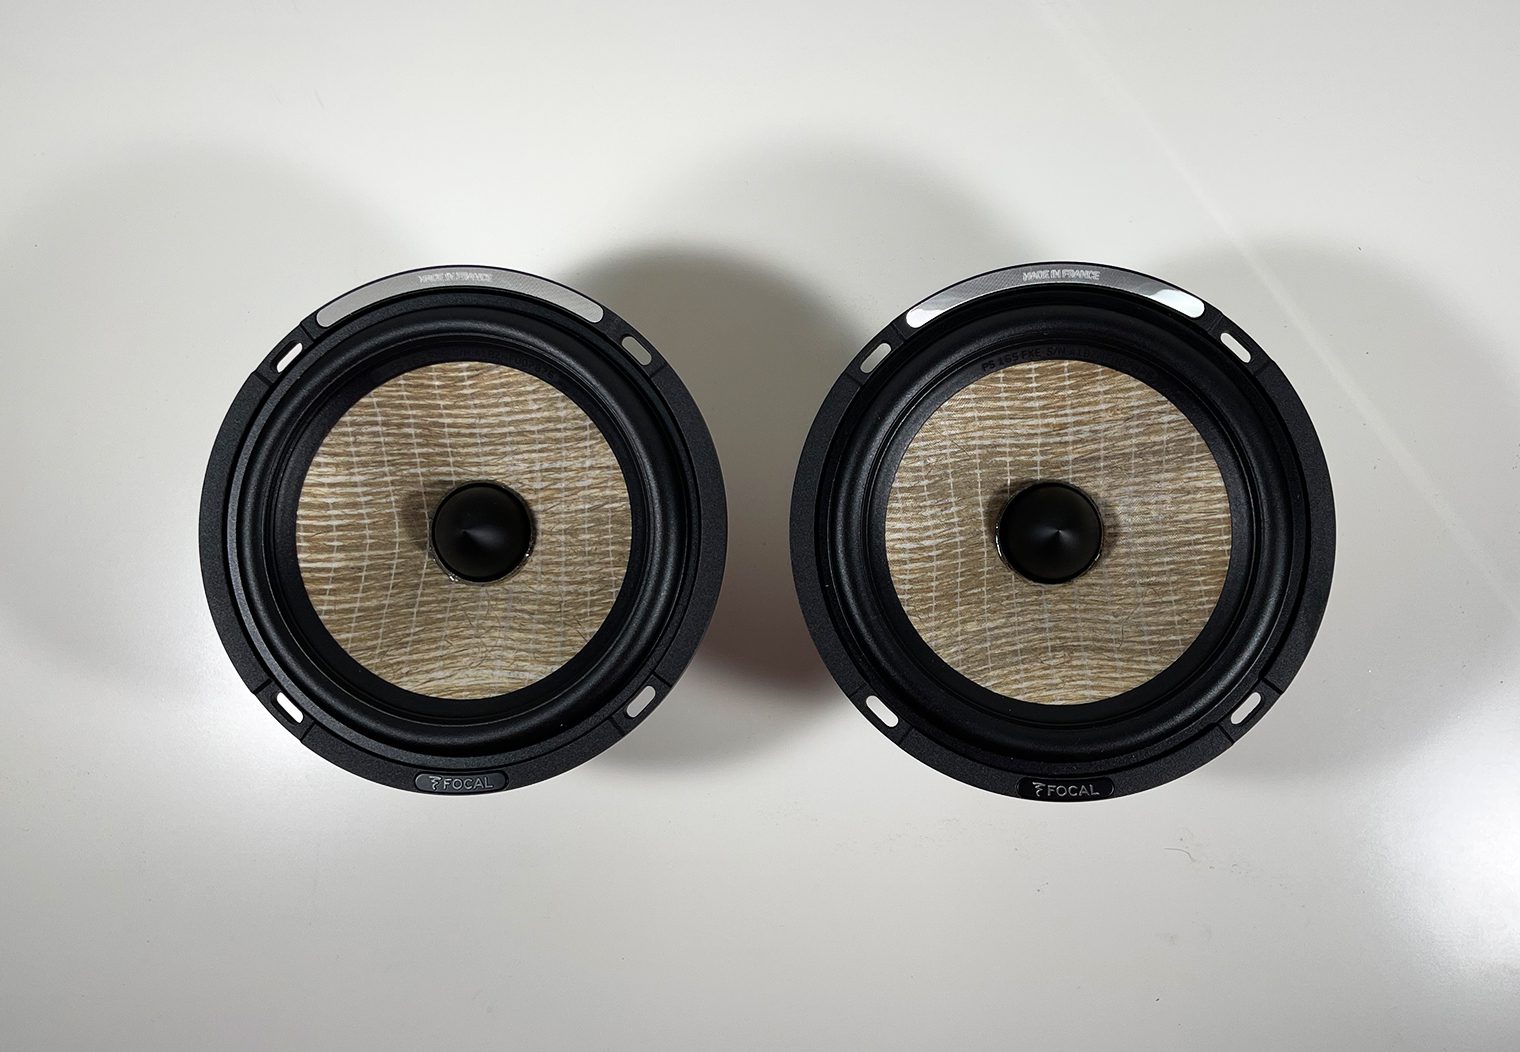 Focal PS 165 FXE woofers out of the box side by side